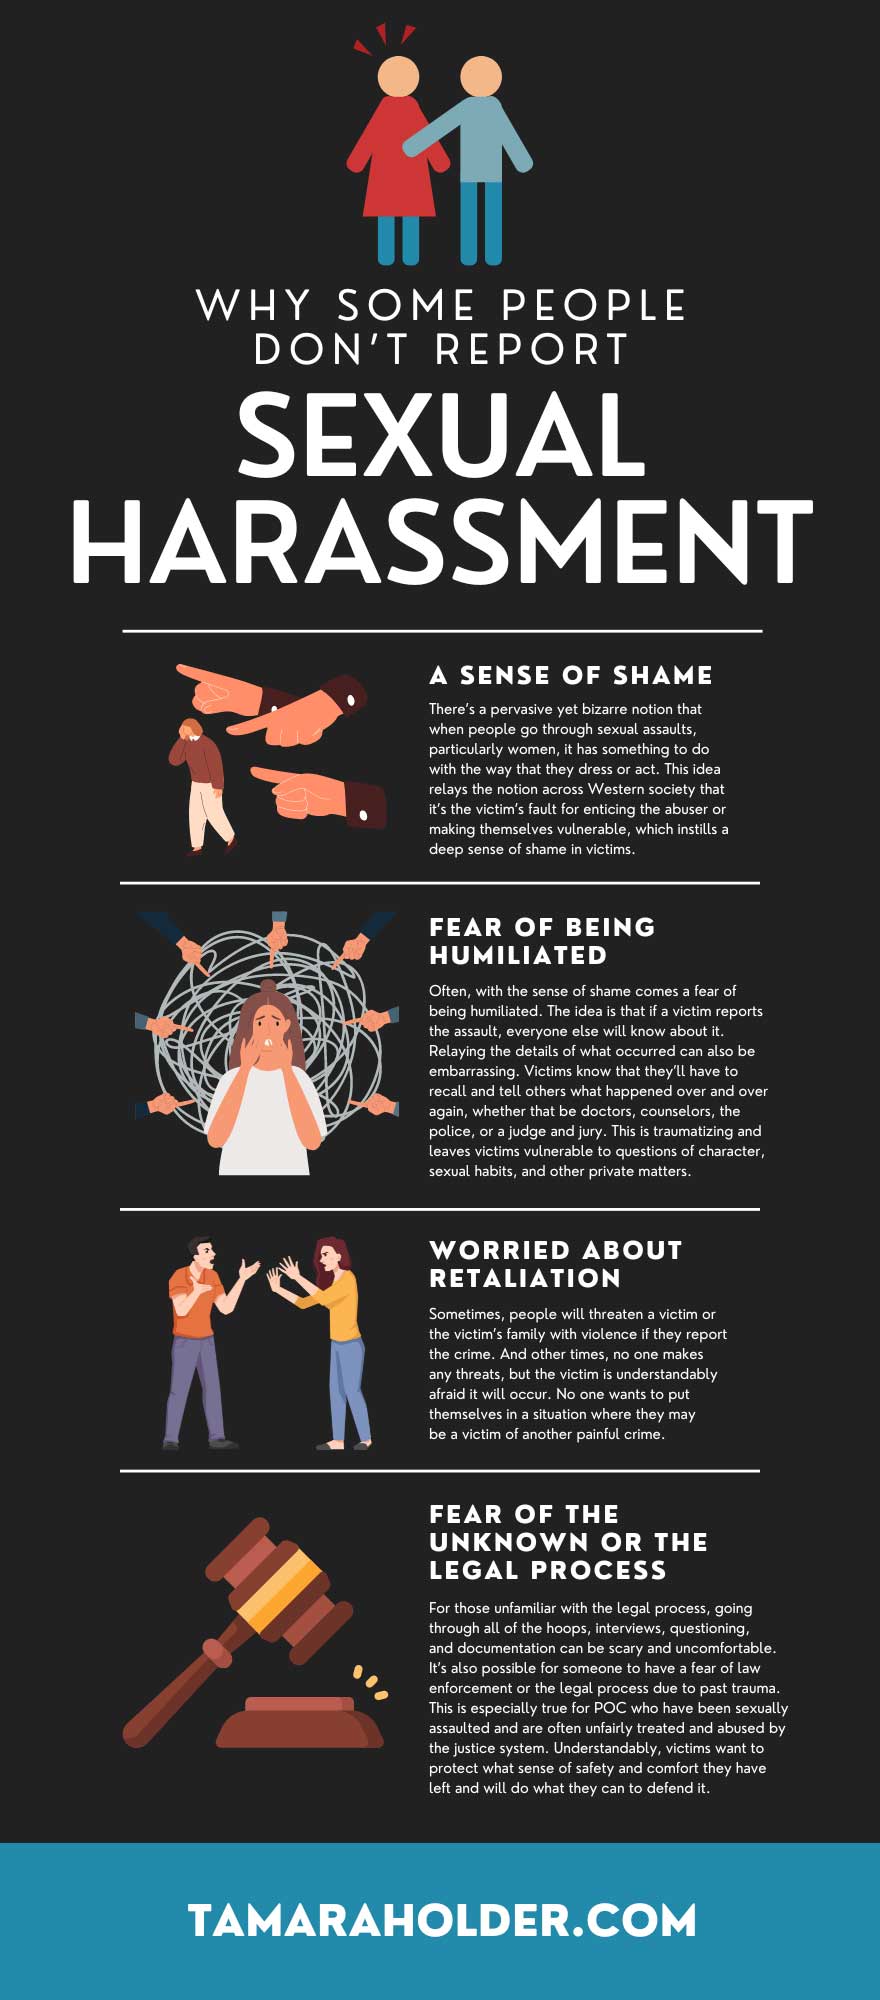 Why Some People Don’t Report Sexual Harassment